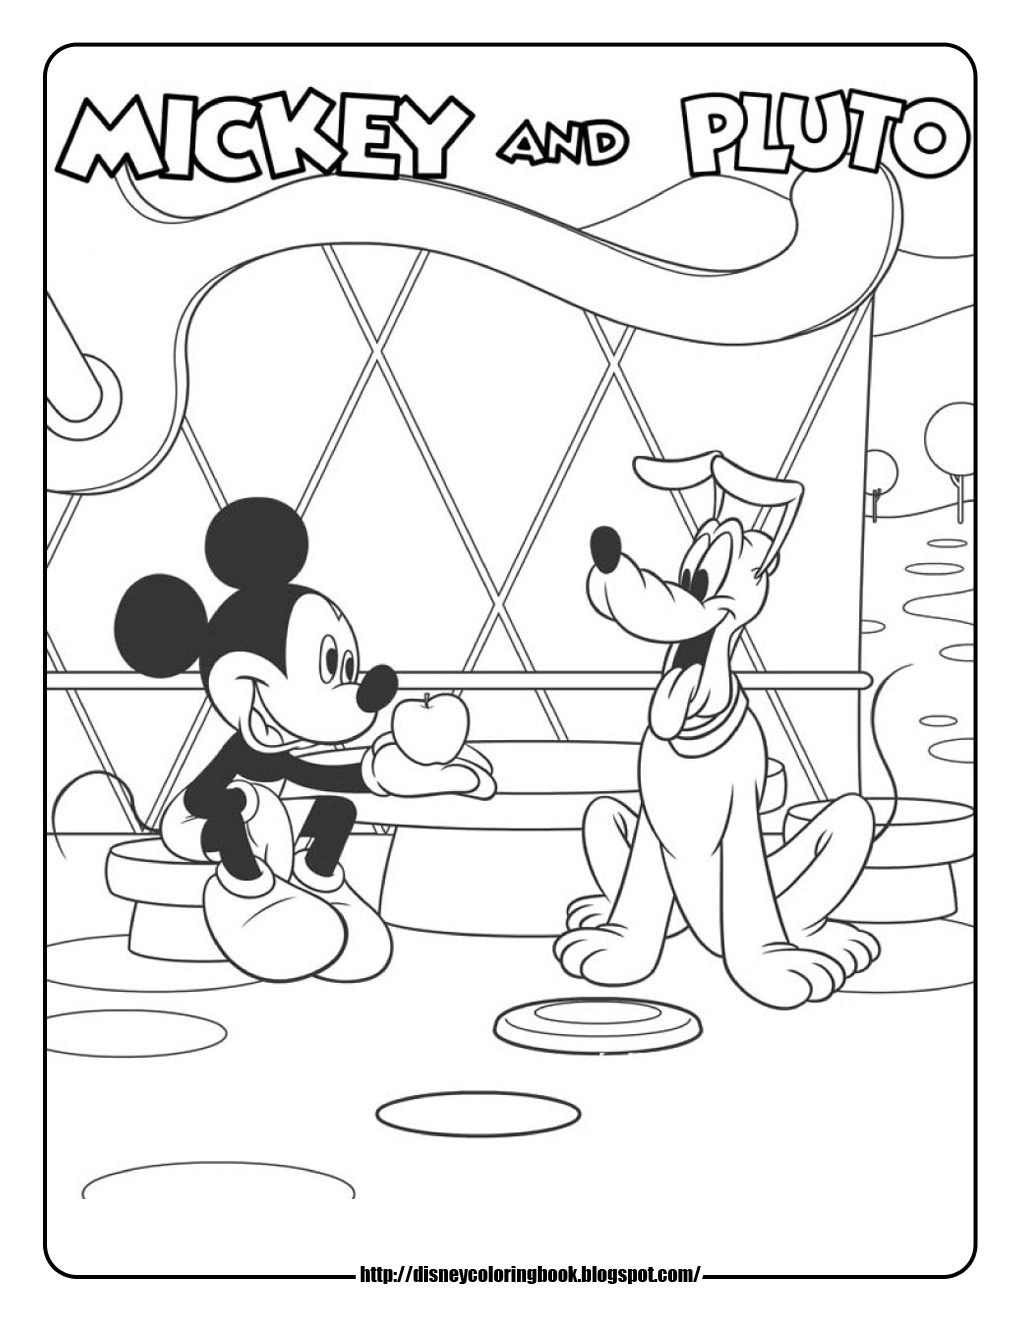 Download Disney Coloring Pages and Sheets for Kids: Mickey Mouse Clubhouse 3: Free Disney Coloring Sheets